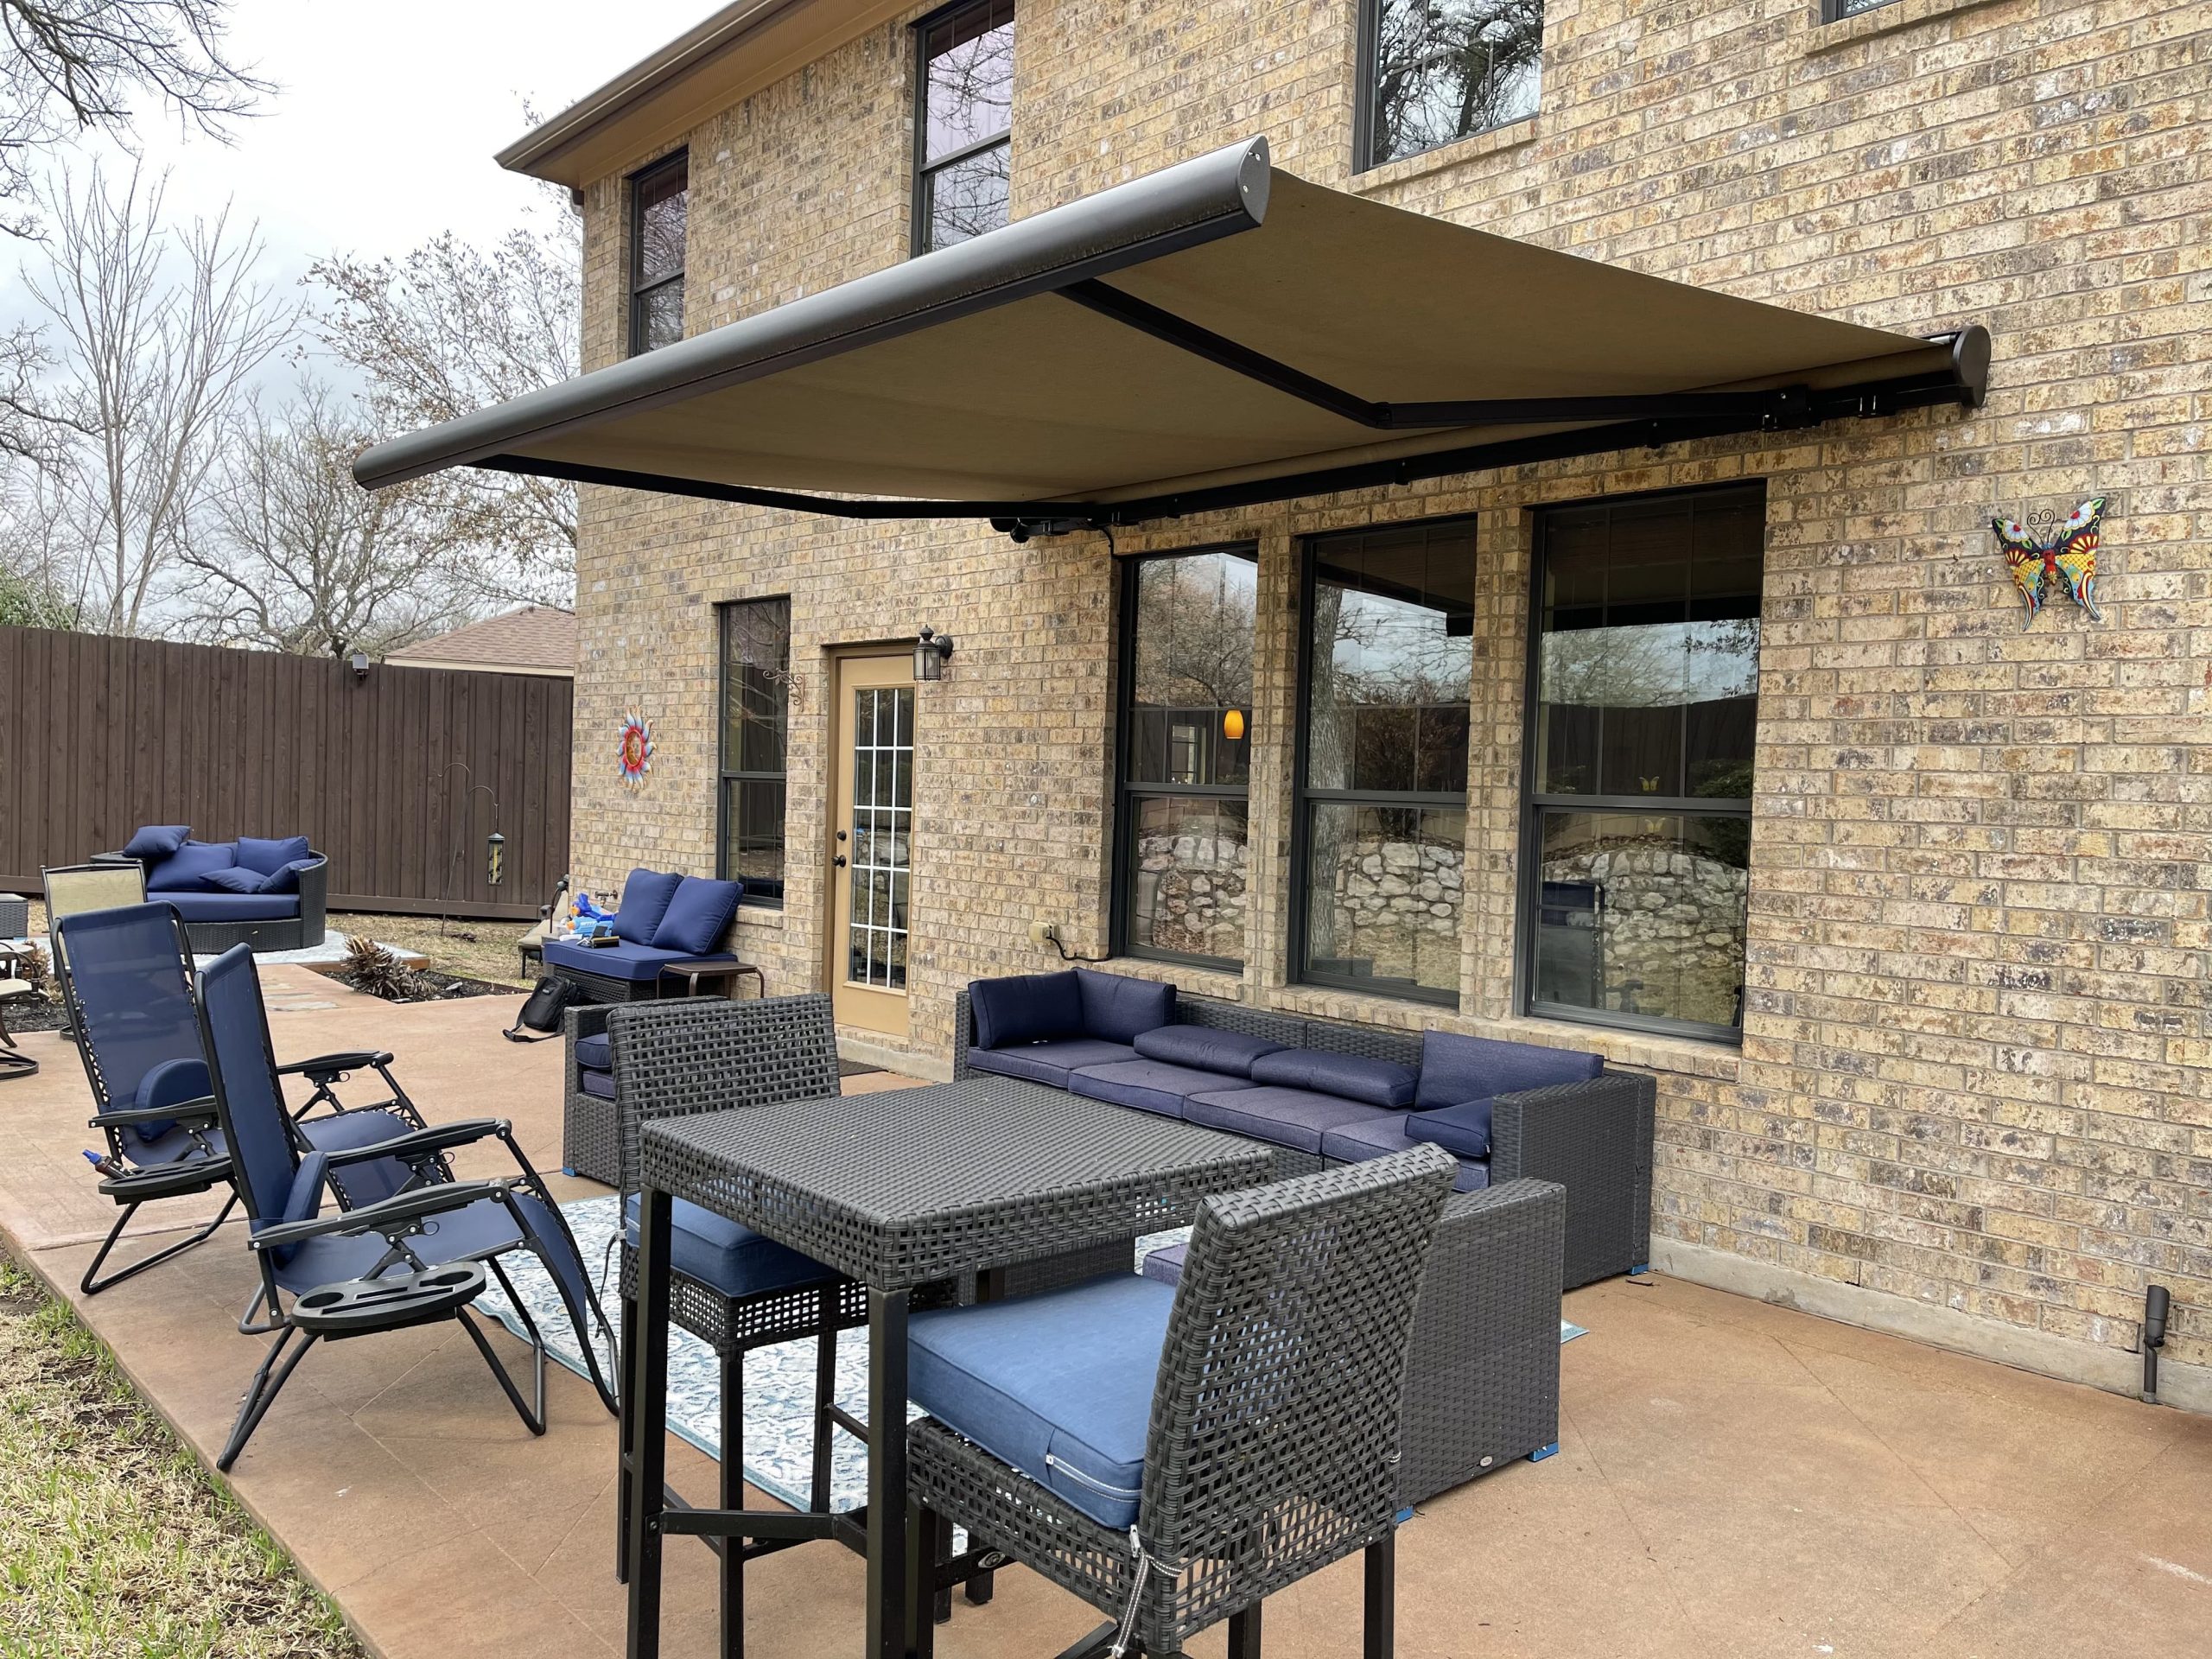 Home with a retractable awning in Texas